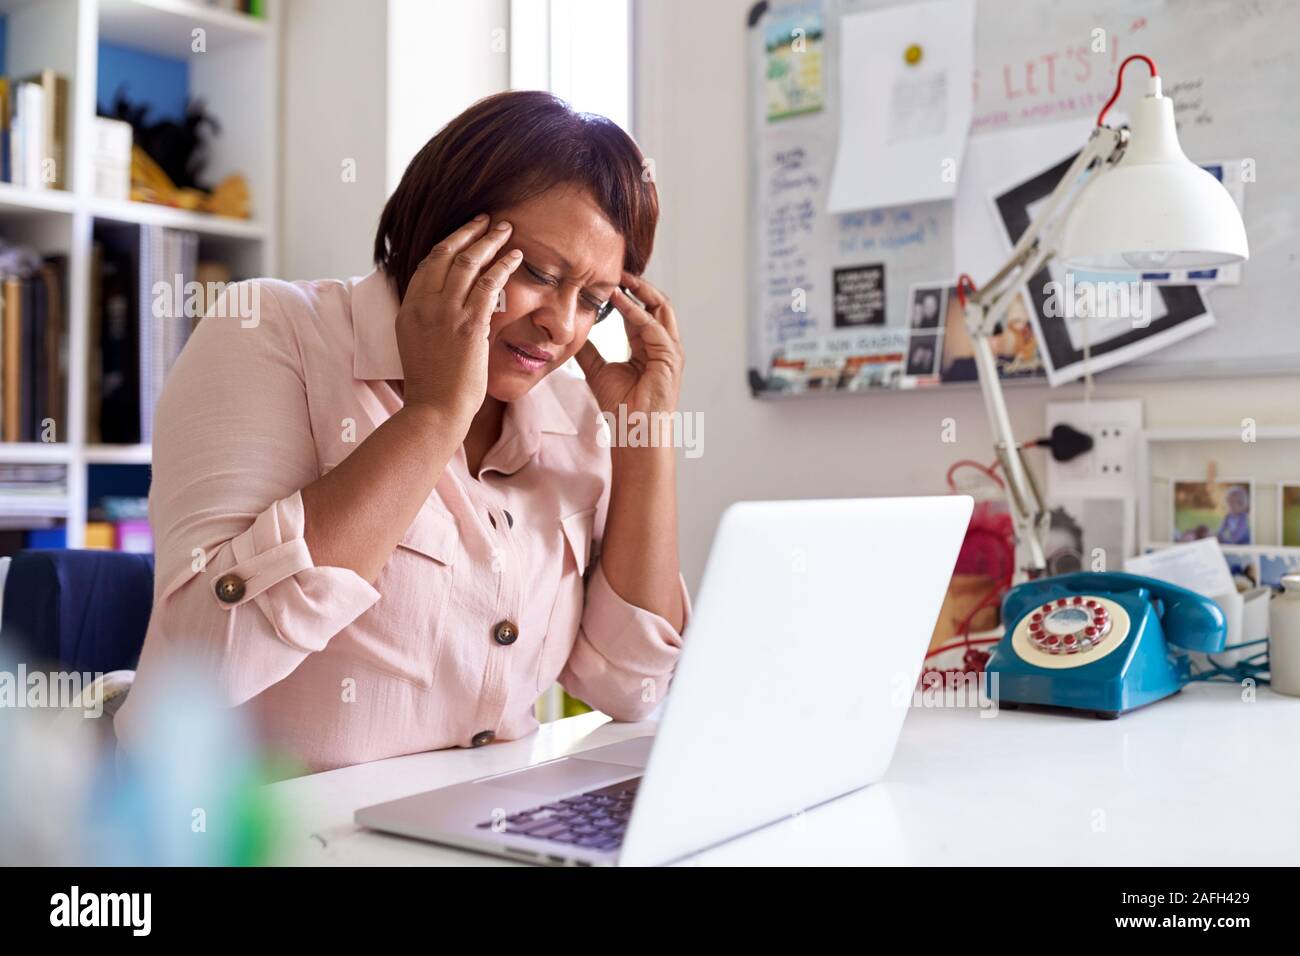 Stressed Mature Woman With Laptop Working In Home Office Stock Photo